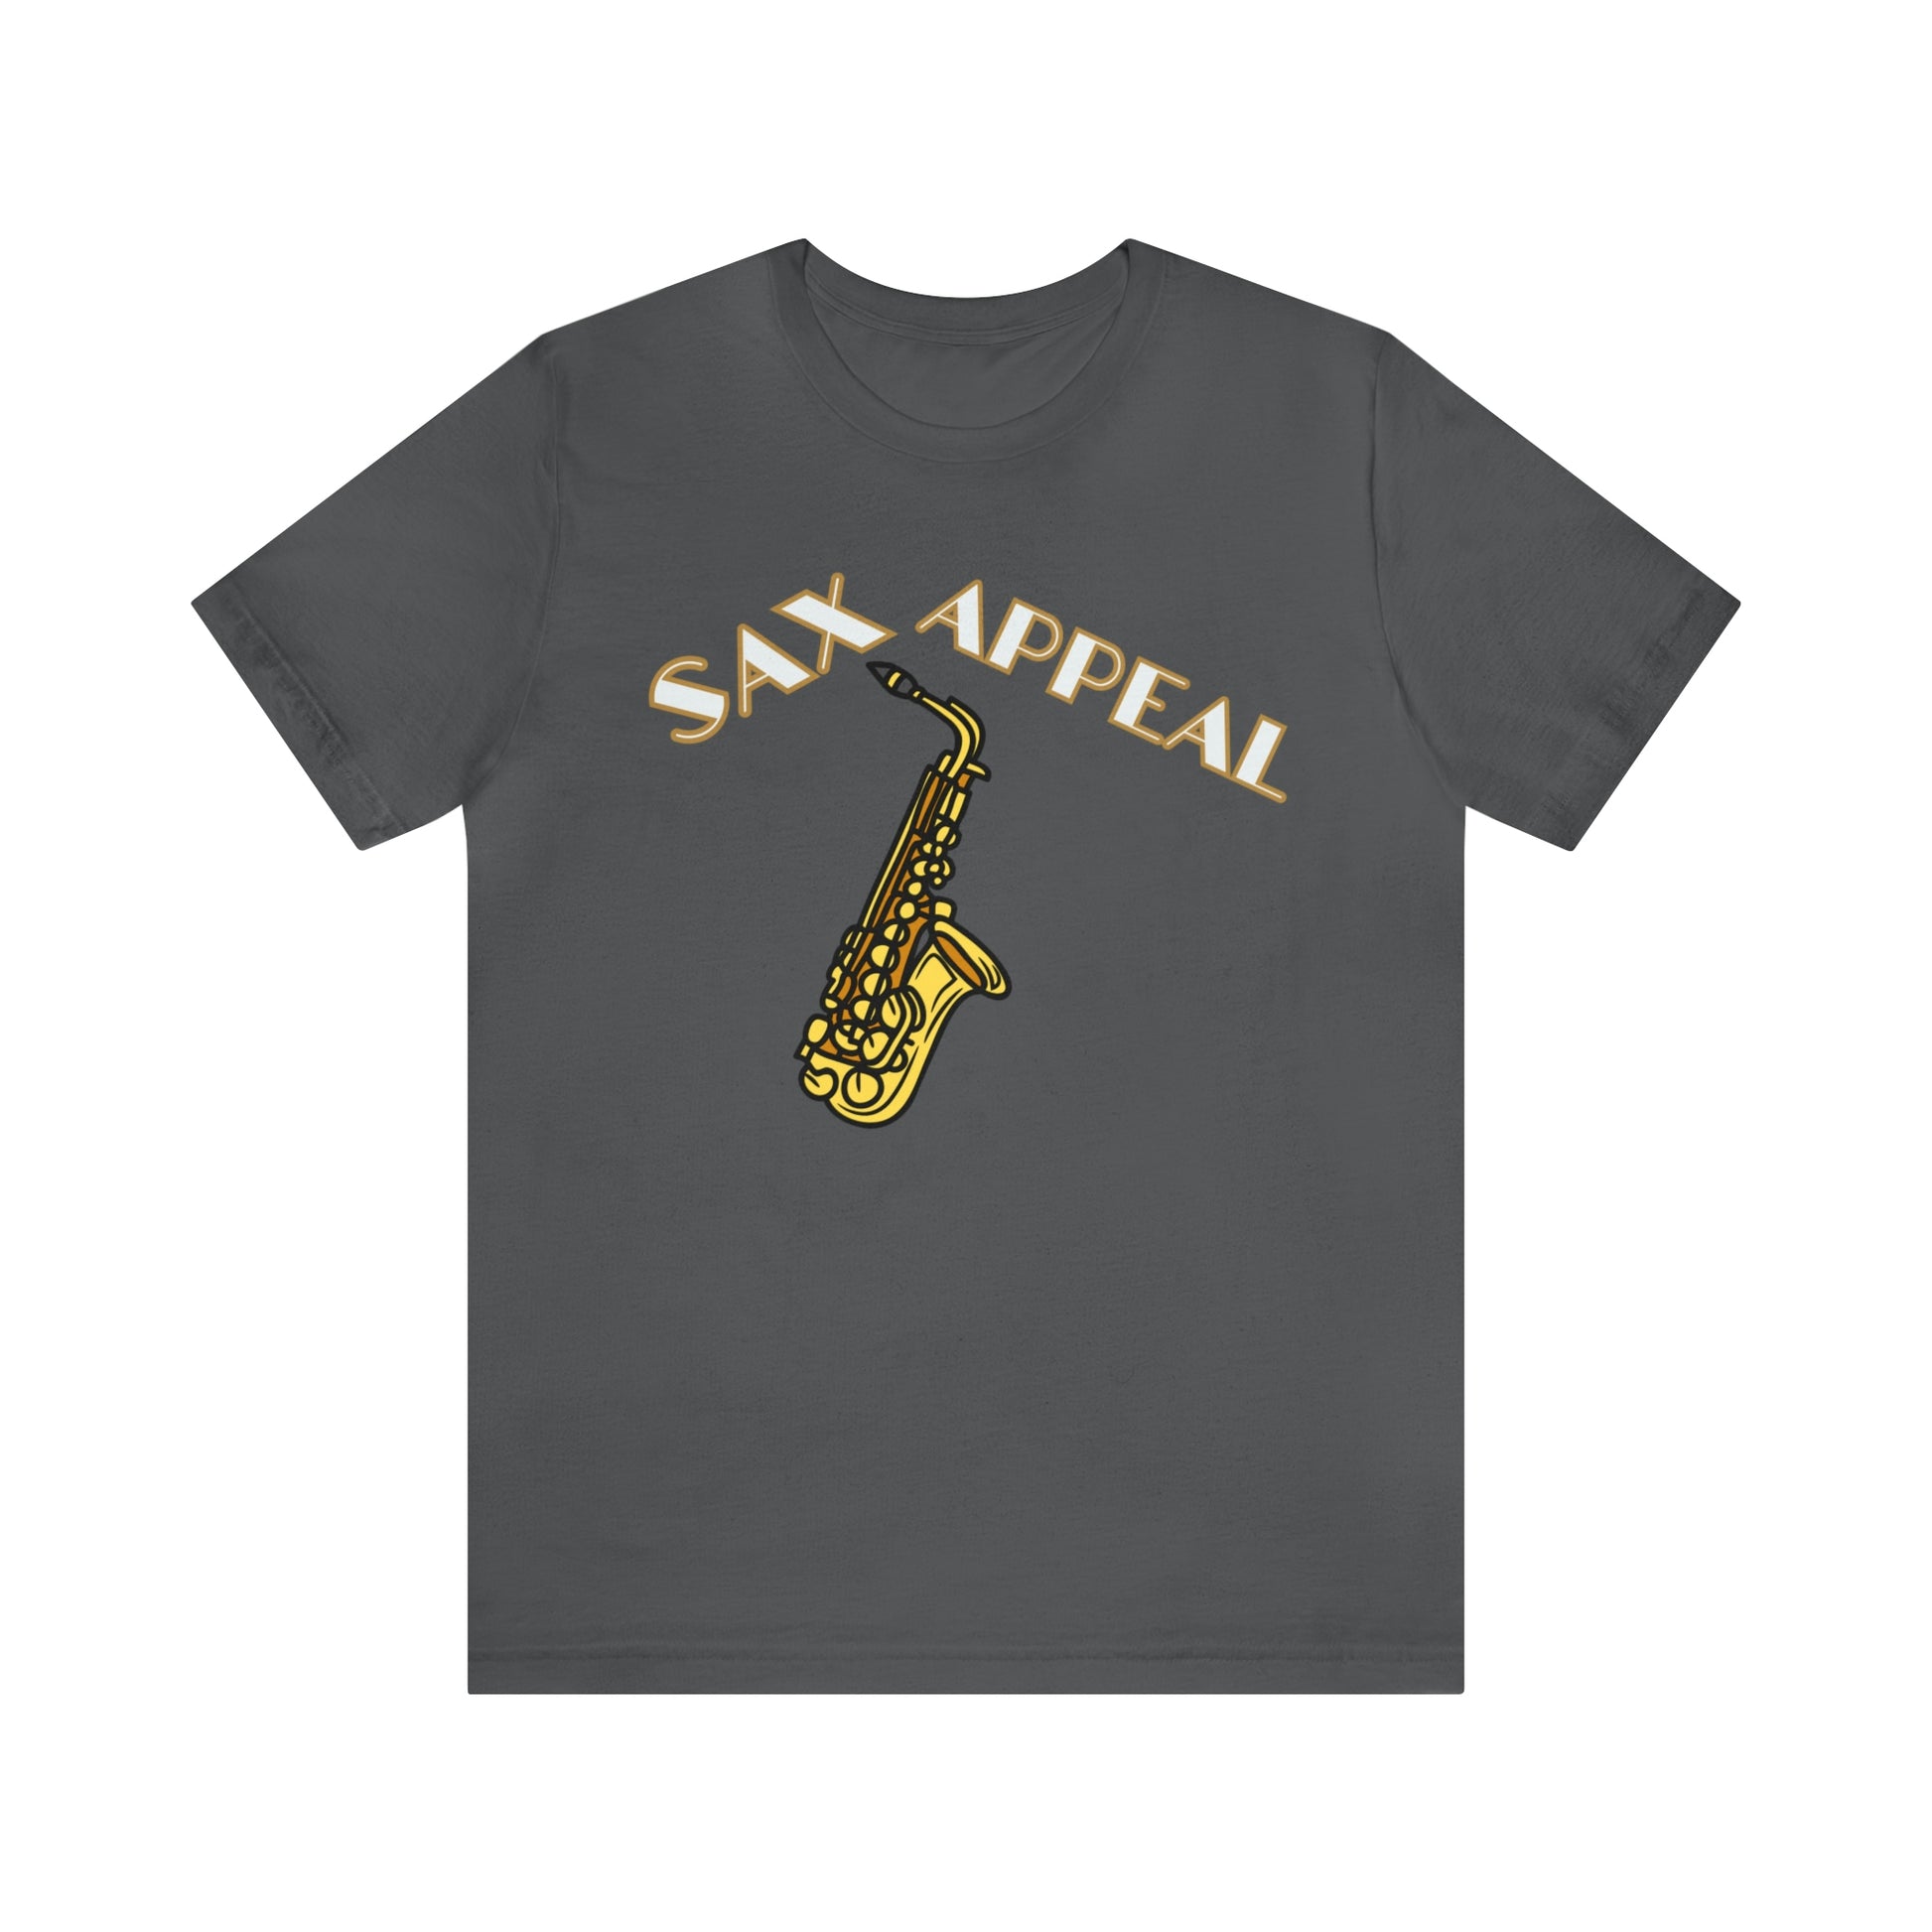 A music tshirt with the text "Sax appeal" with a retro font and a picture of saxophone. A funny jazz music tshirt!